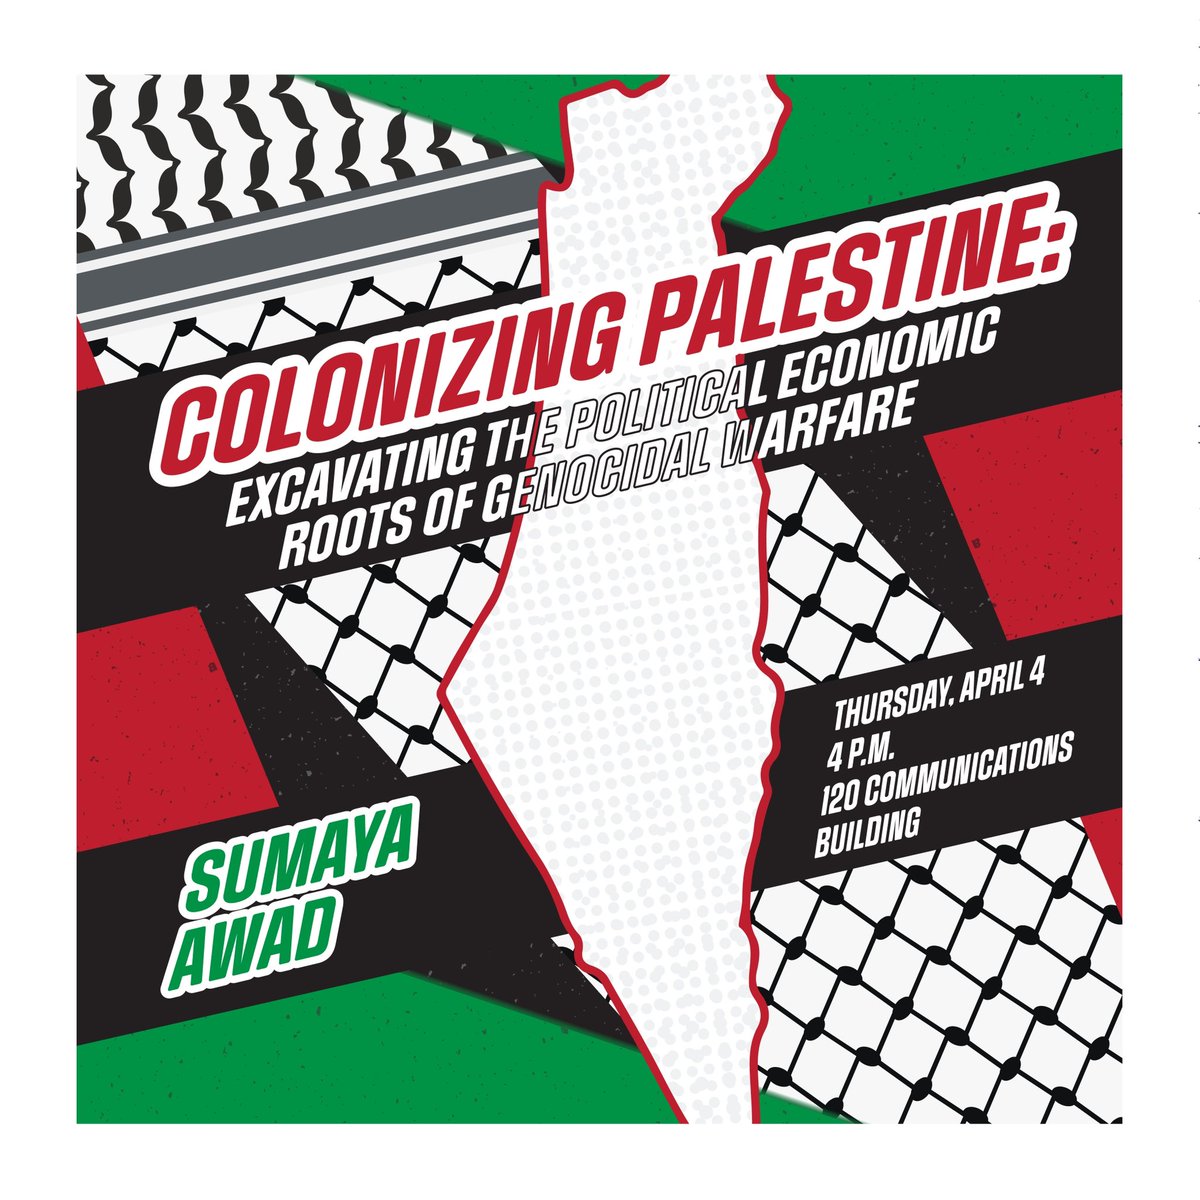 Join us for a talk on Colonizing Palestine: Excavating the Political Economic Roots of Genocidal Warfare with Sumaya Awad later today at 4pm in Communications 120! #palestine #laborstudies #SumayaAwad